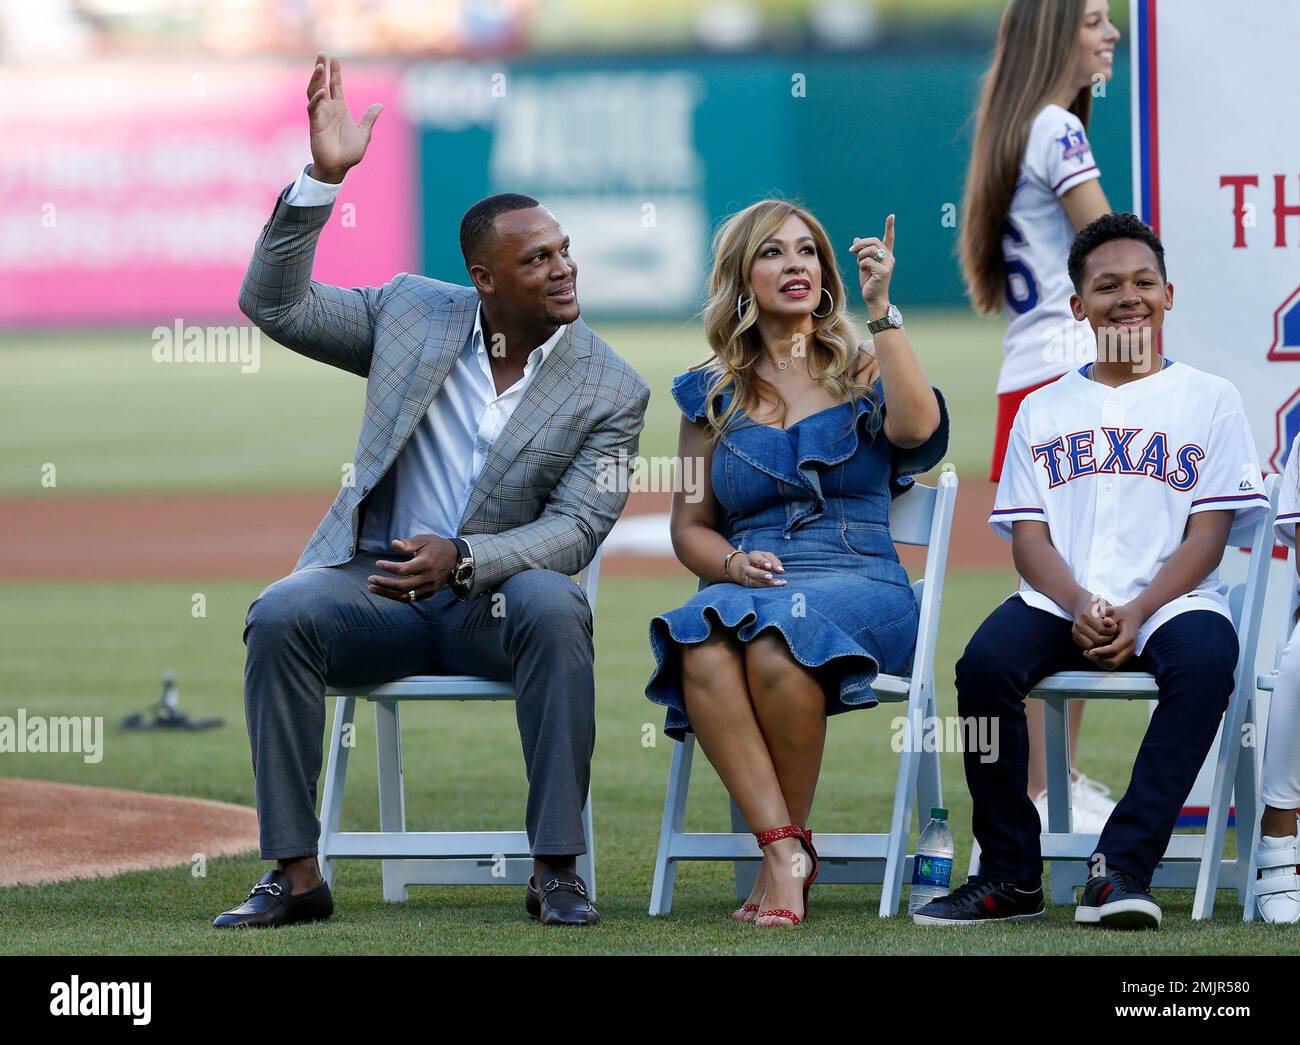 Former Texas Rangers player, Adrian Beltre (left) waves to the